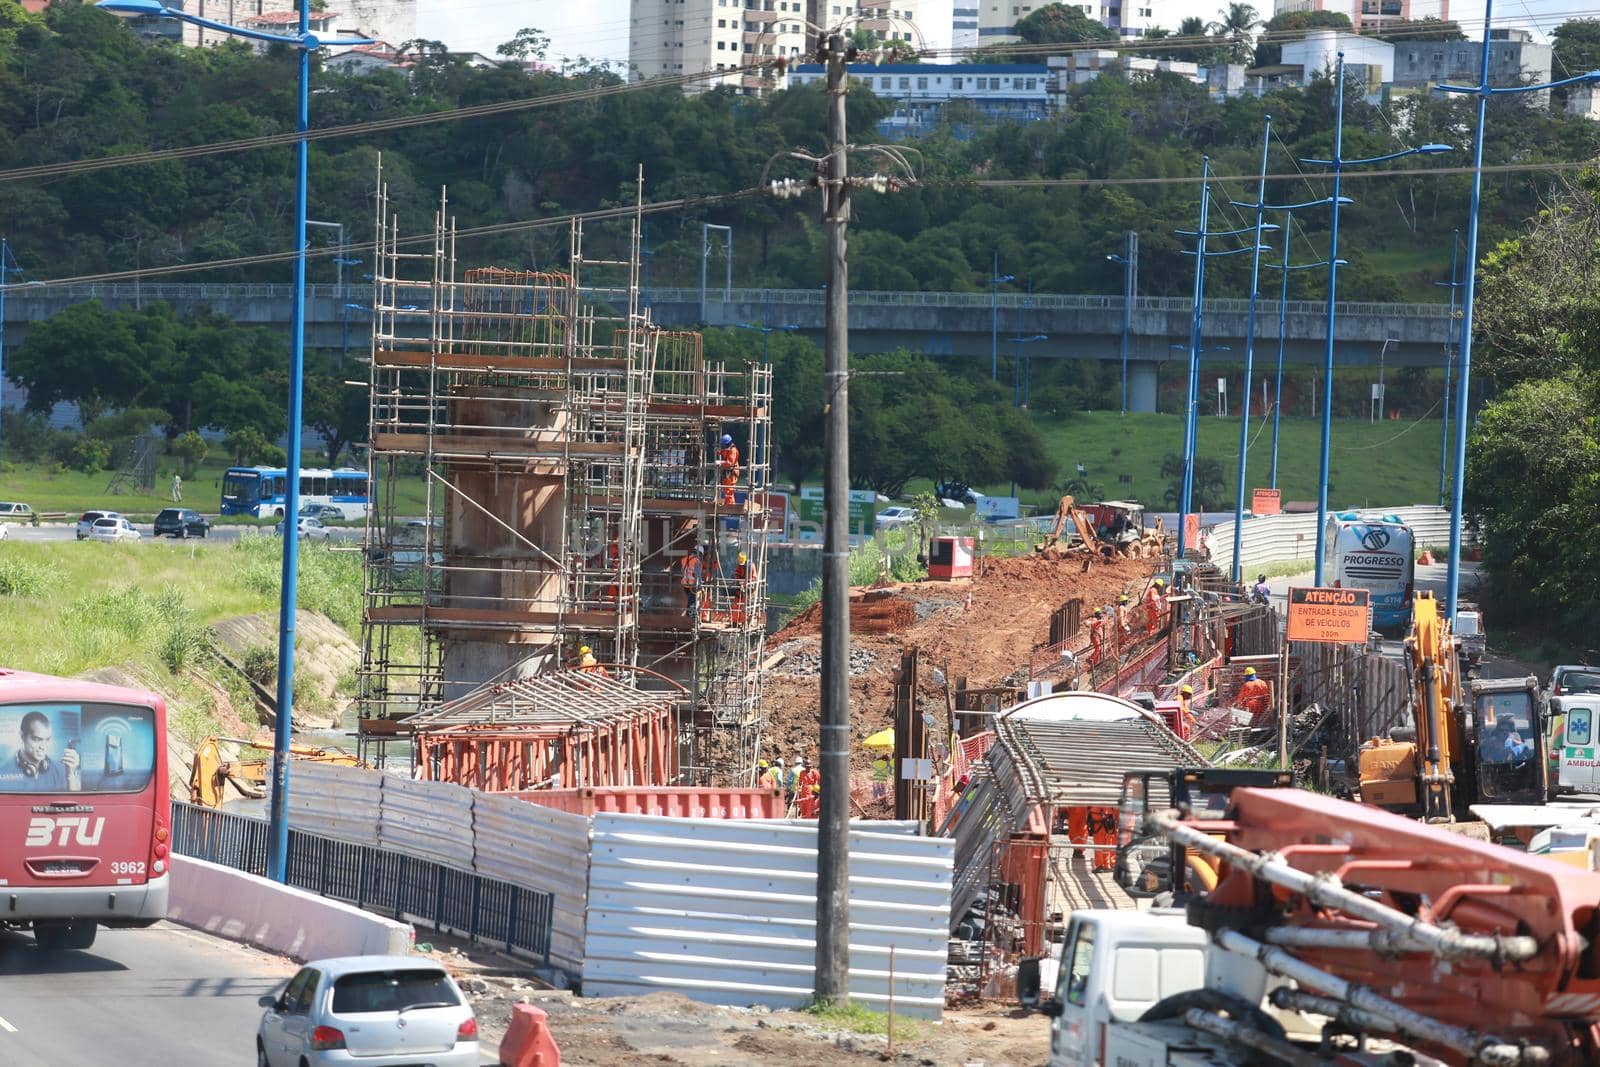 salvador, bahia / brazil - may 6, 2015: Workers work together to traffic vehicles on Avenida Antonio Carlos Magalhaes in works to expand the subway of Salvador.